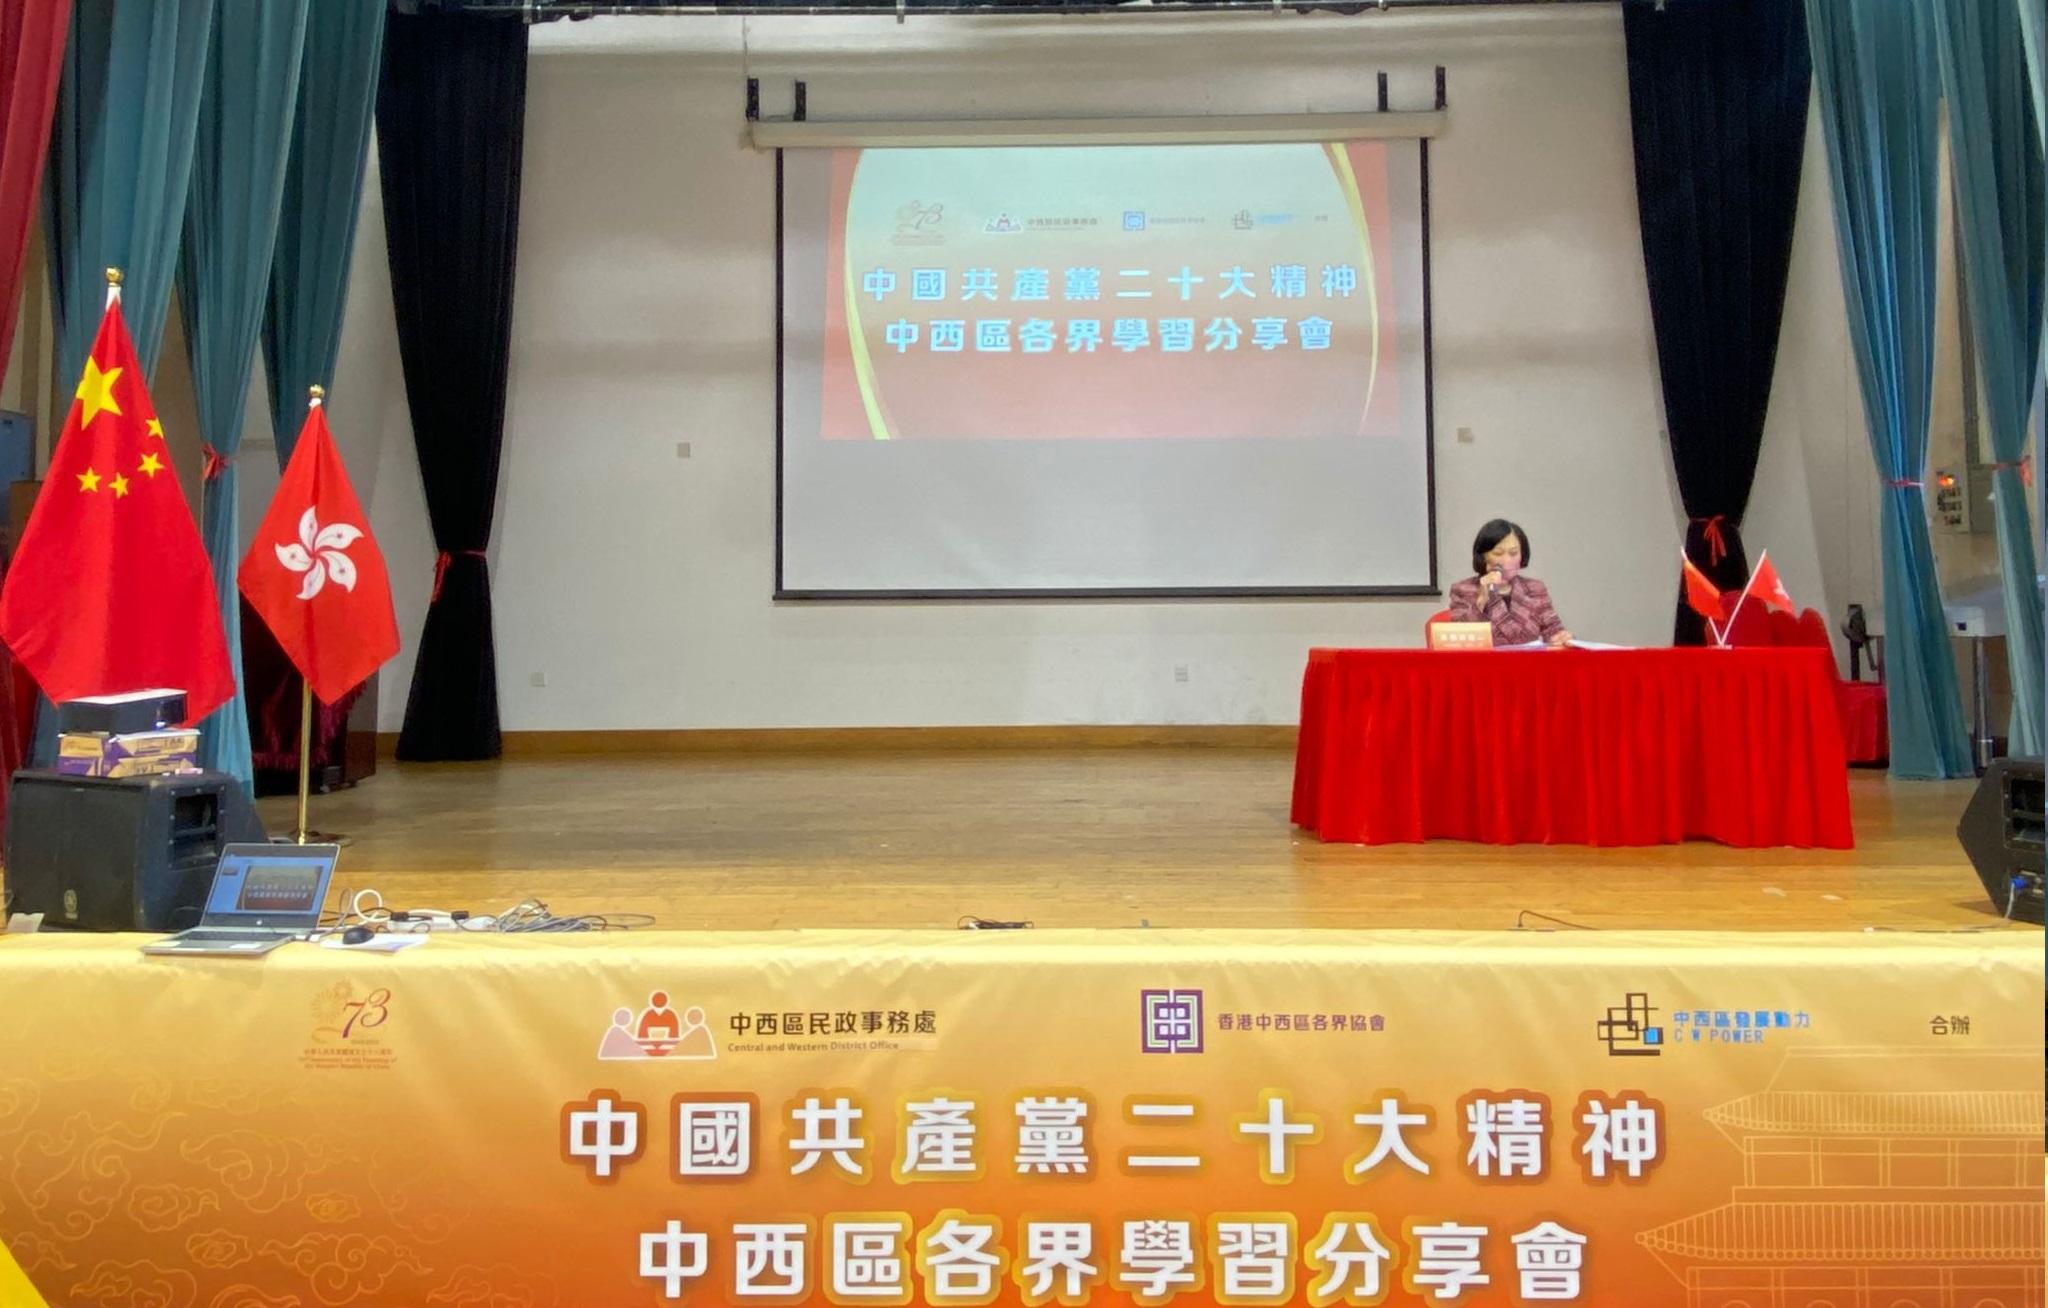 The Central and Western District Office, together with the Association of the Hong Kong Central and Western District and CW Power, today (October 27) held the session on "Essence of the 20th National Congress of the Communist Party of China" at Sai Ying Pun Community Complex Community Hall. Photo shows the Convenor of the Executive Council and Member of the Legislative Council, Mrs Regina Ip, speaking at the Session.